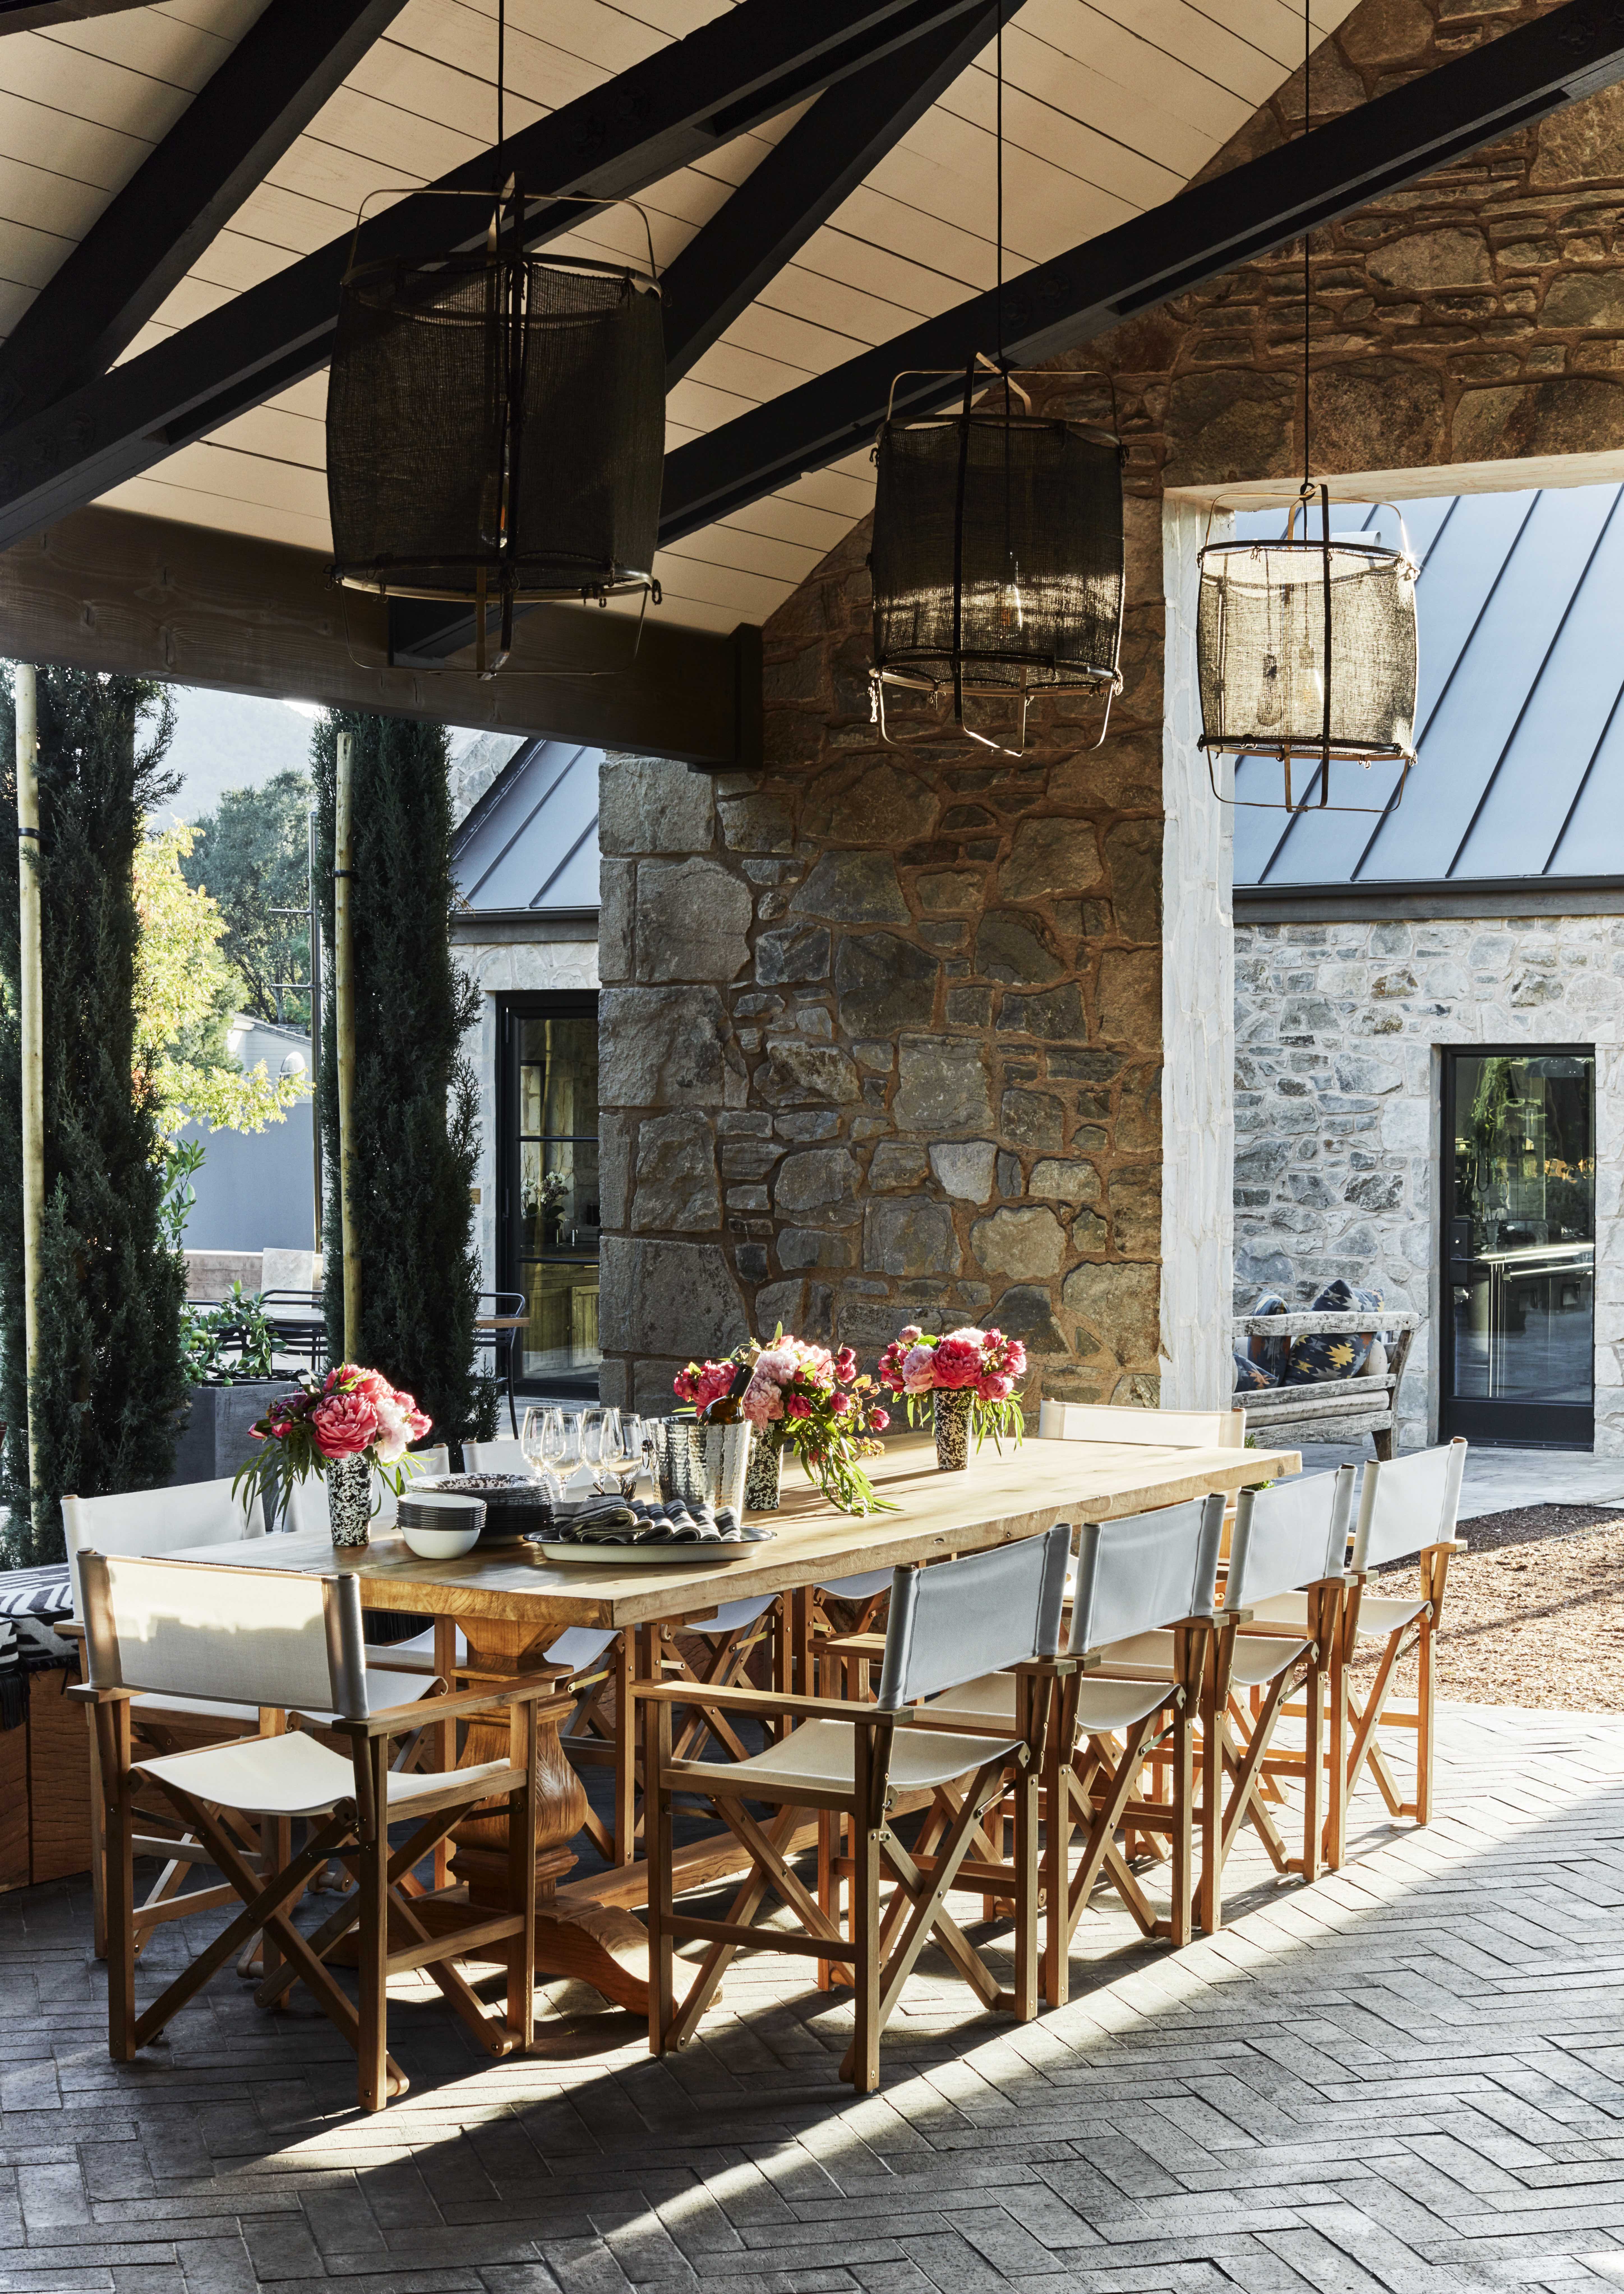 Stewart Cellars is a one-of-a-kind Napa Valley destination that was inspired by an ancient Scottish abbey, a nod to the Stewart family heritage.